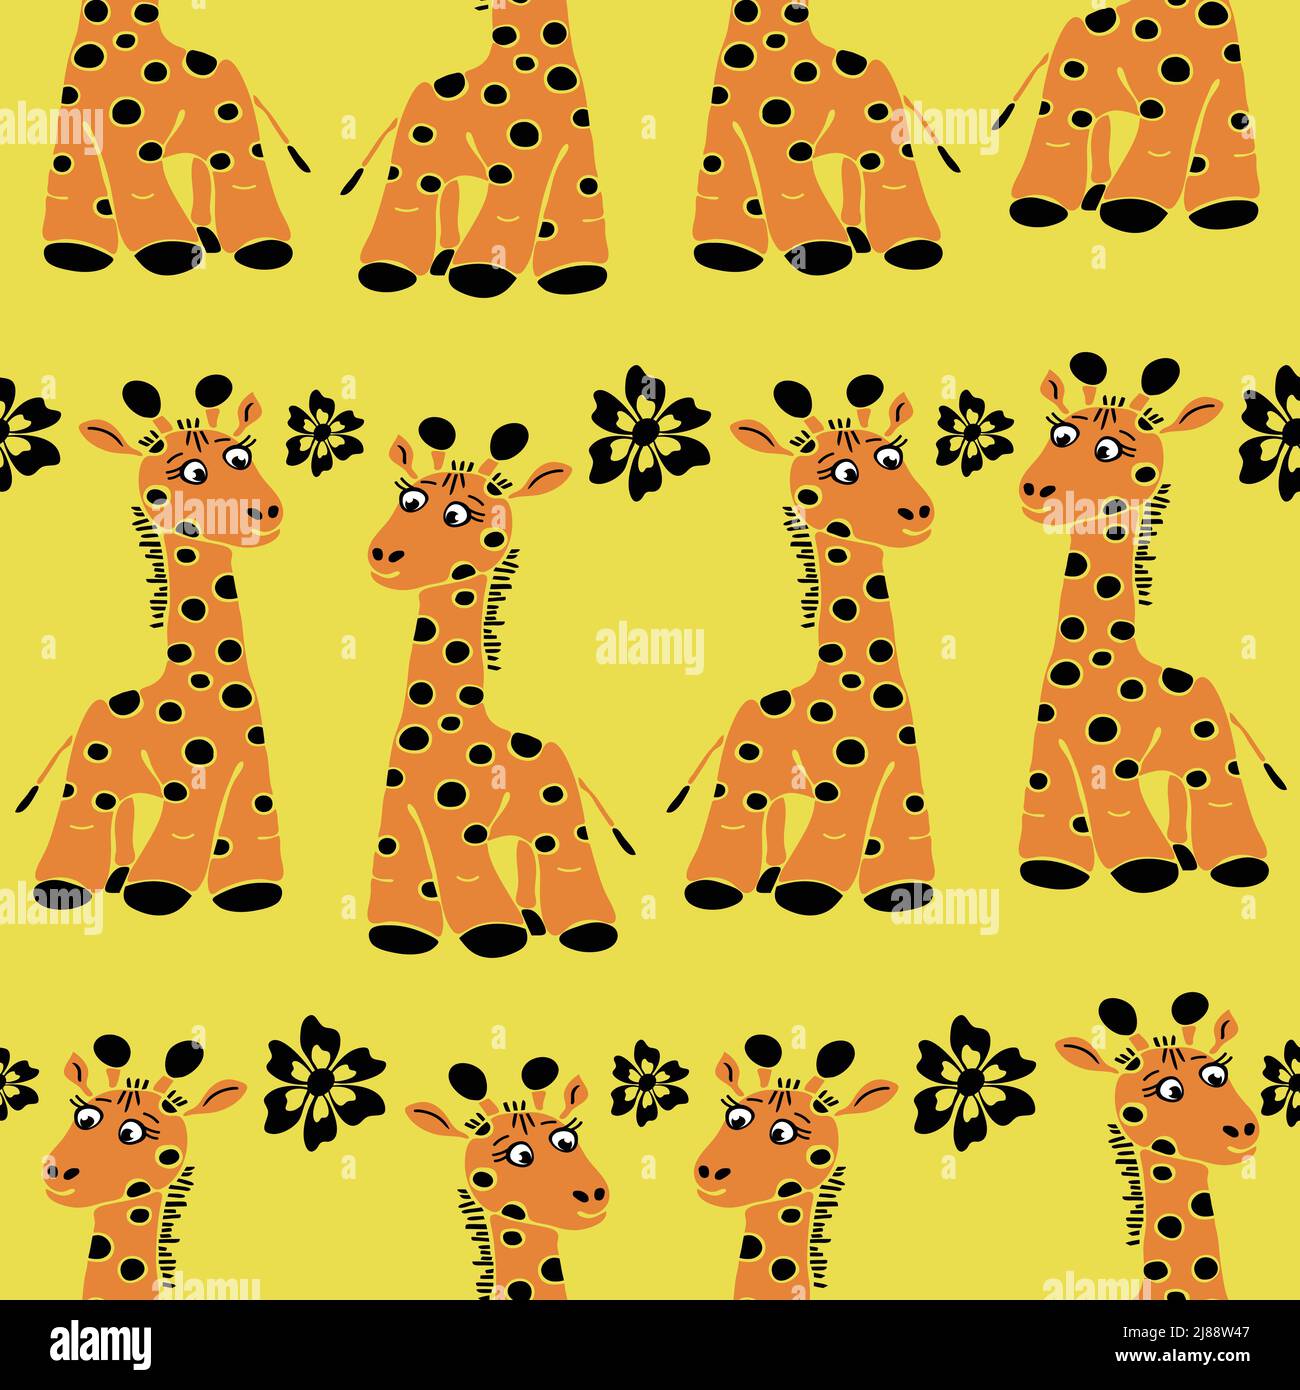 Seamless vector pattern with cartoon style giraffes on yellow background. Animal wallpaper design for children. Stock Vector